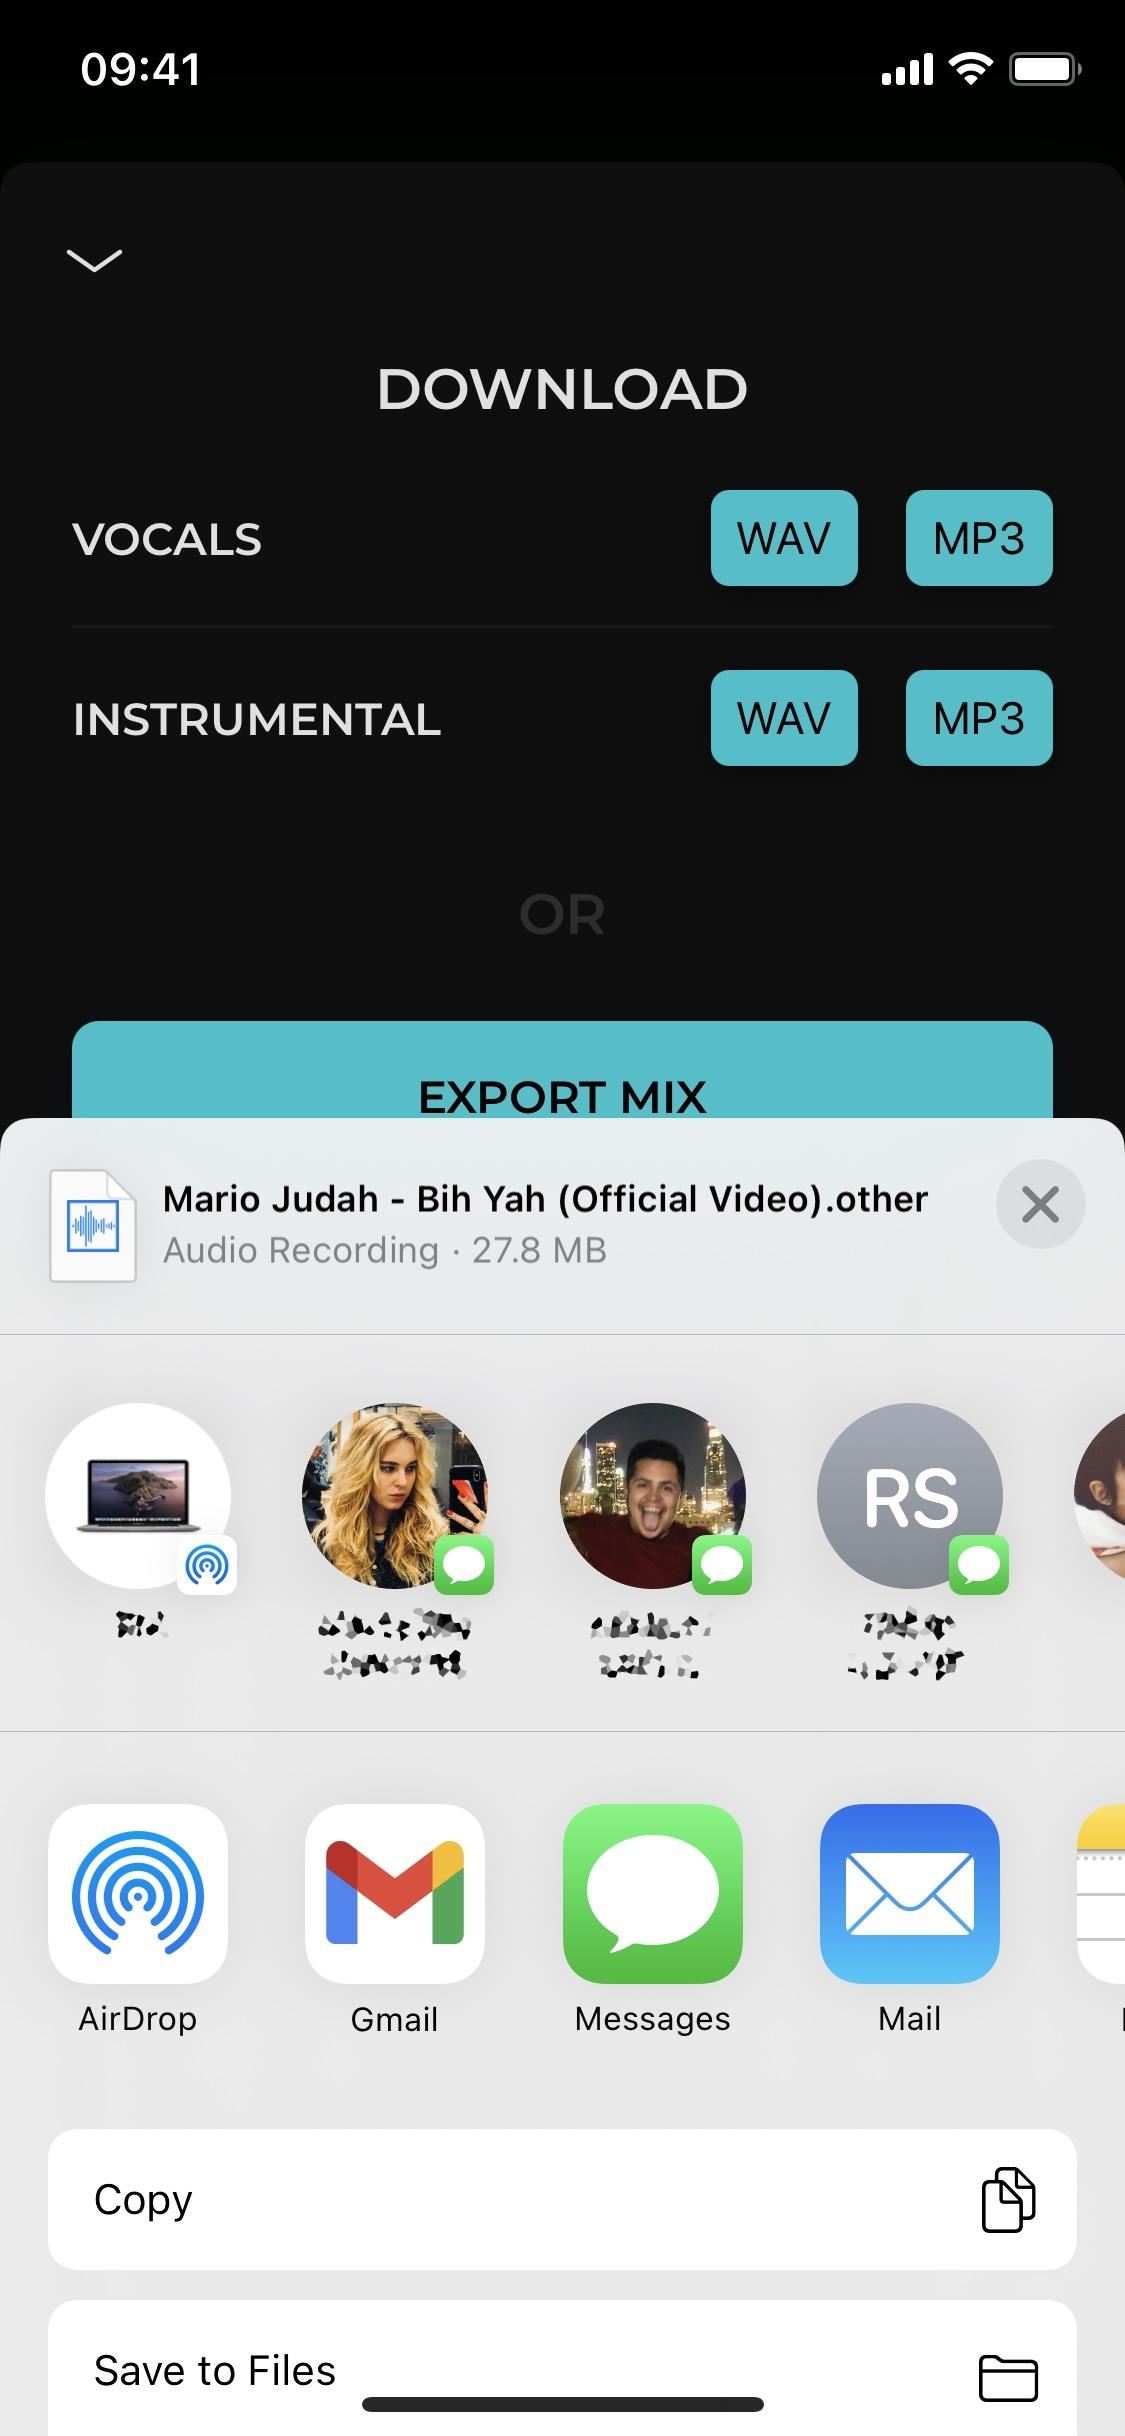 Separate Vocals & Instrument Tracks from Your Favorite Songs to Make Karaoke Music or Play Along with the Band